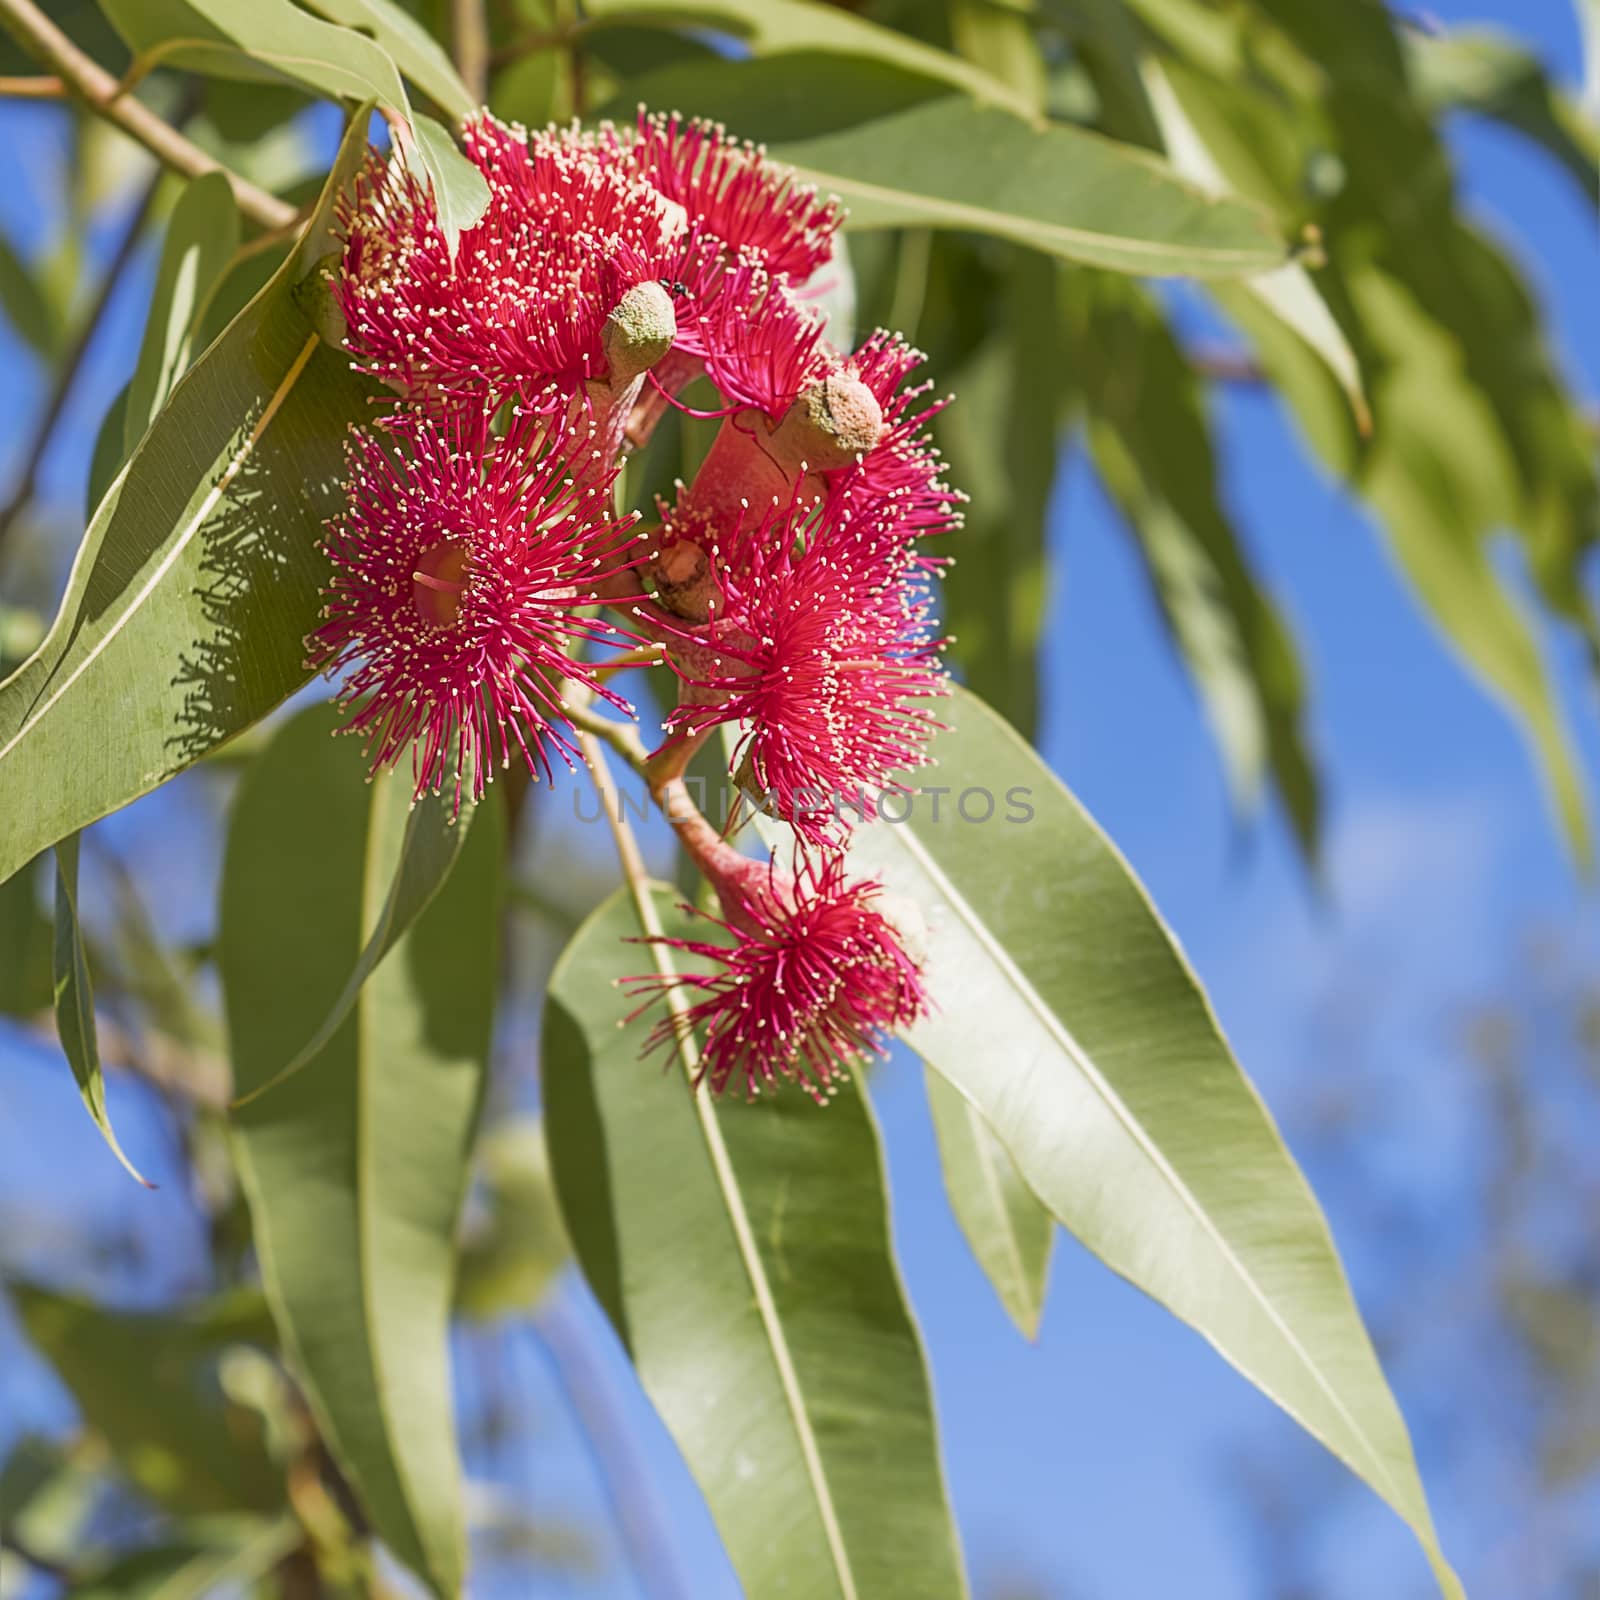 Australian iconic red eucalyptus flowers with green gum leaves and blue sky background close up in square format